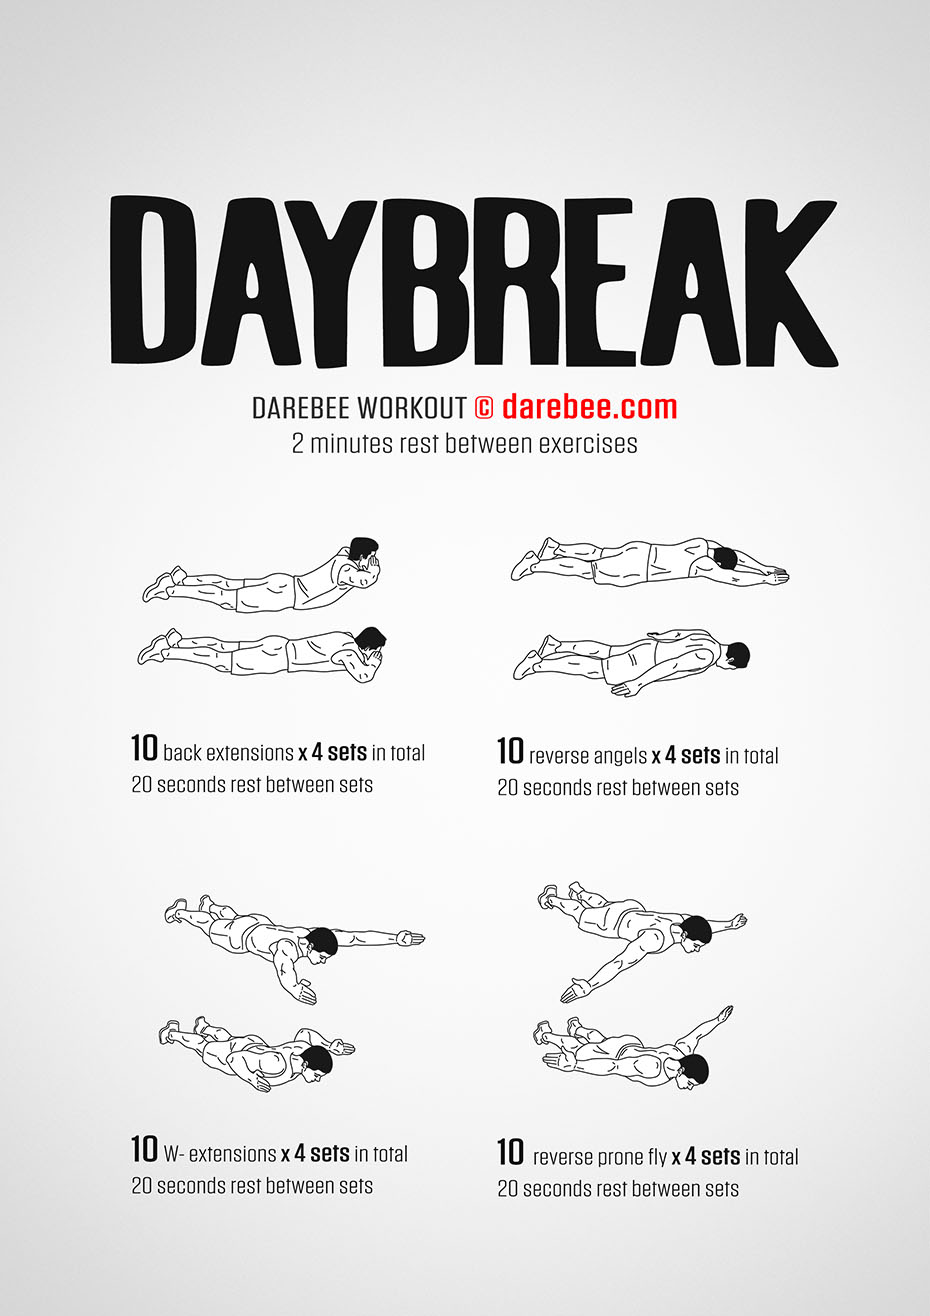 Daybreak is a DAREBEE home fitness, no-equipment upper body strength workout you can do at home.